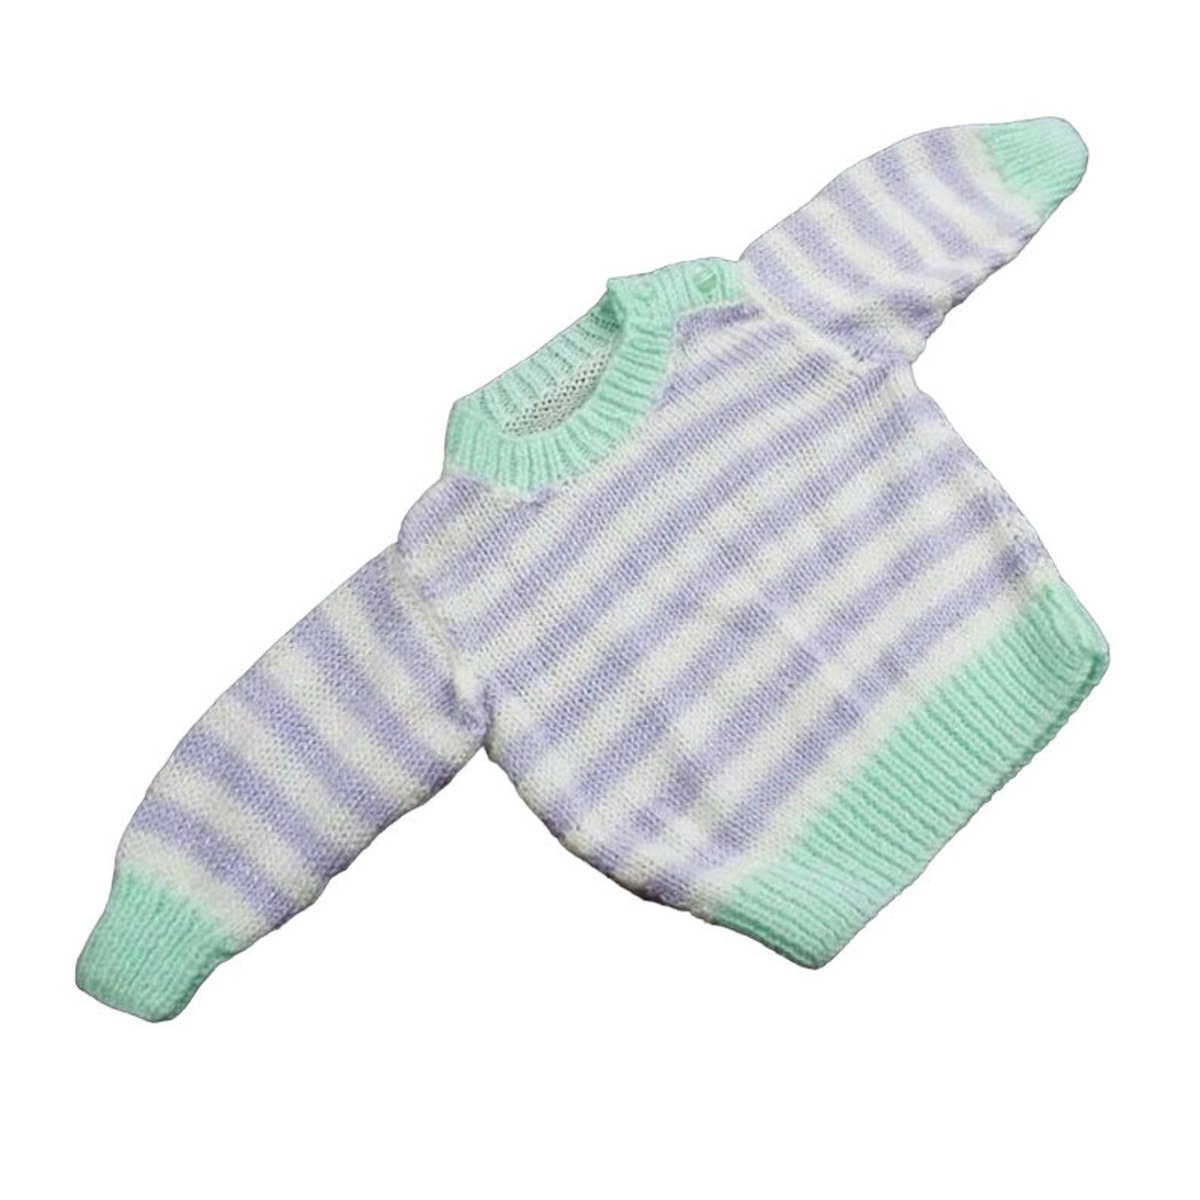 Dress your little one in this hand-knitted baby jumper in lovely lilac and white stripes! Suitable for 3-6 months old. Grab it now on #Etsy: knittingtopia.etsy.com/listing/168982… #Knittingtopia #Handmade #craftbizparty #MHHSBD #babyessentials #shophandmade